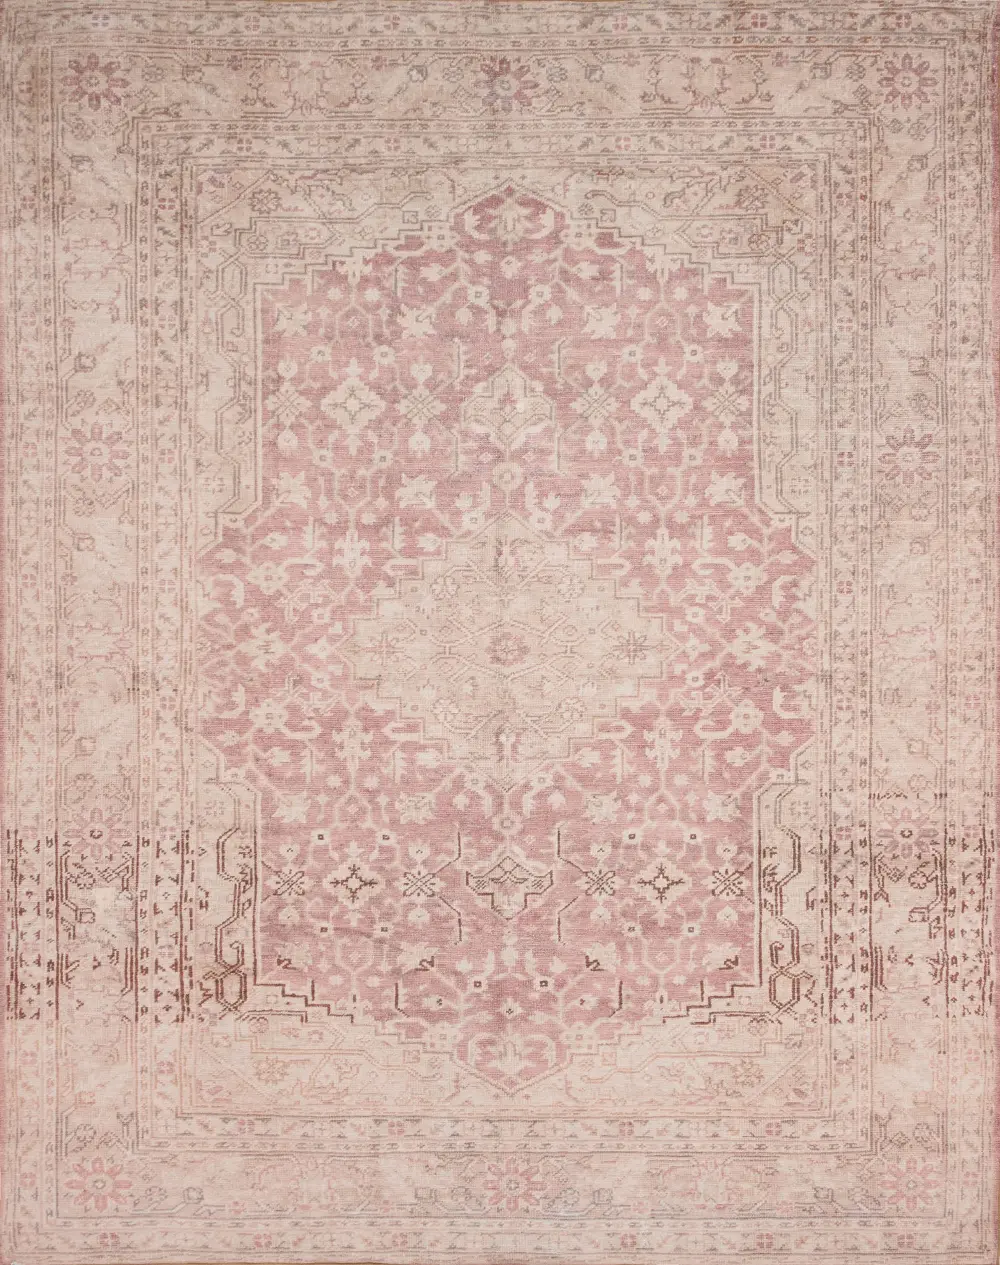 LF-017.6X9.6 8 x 10 Large Terracotta and Ivory Area Rug - Lucca-1